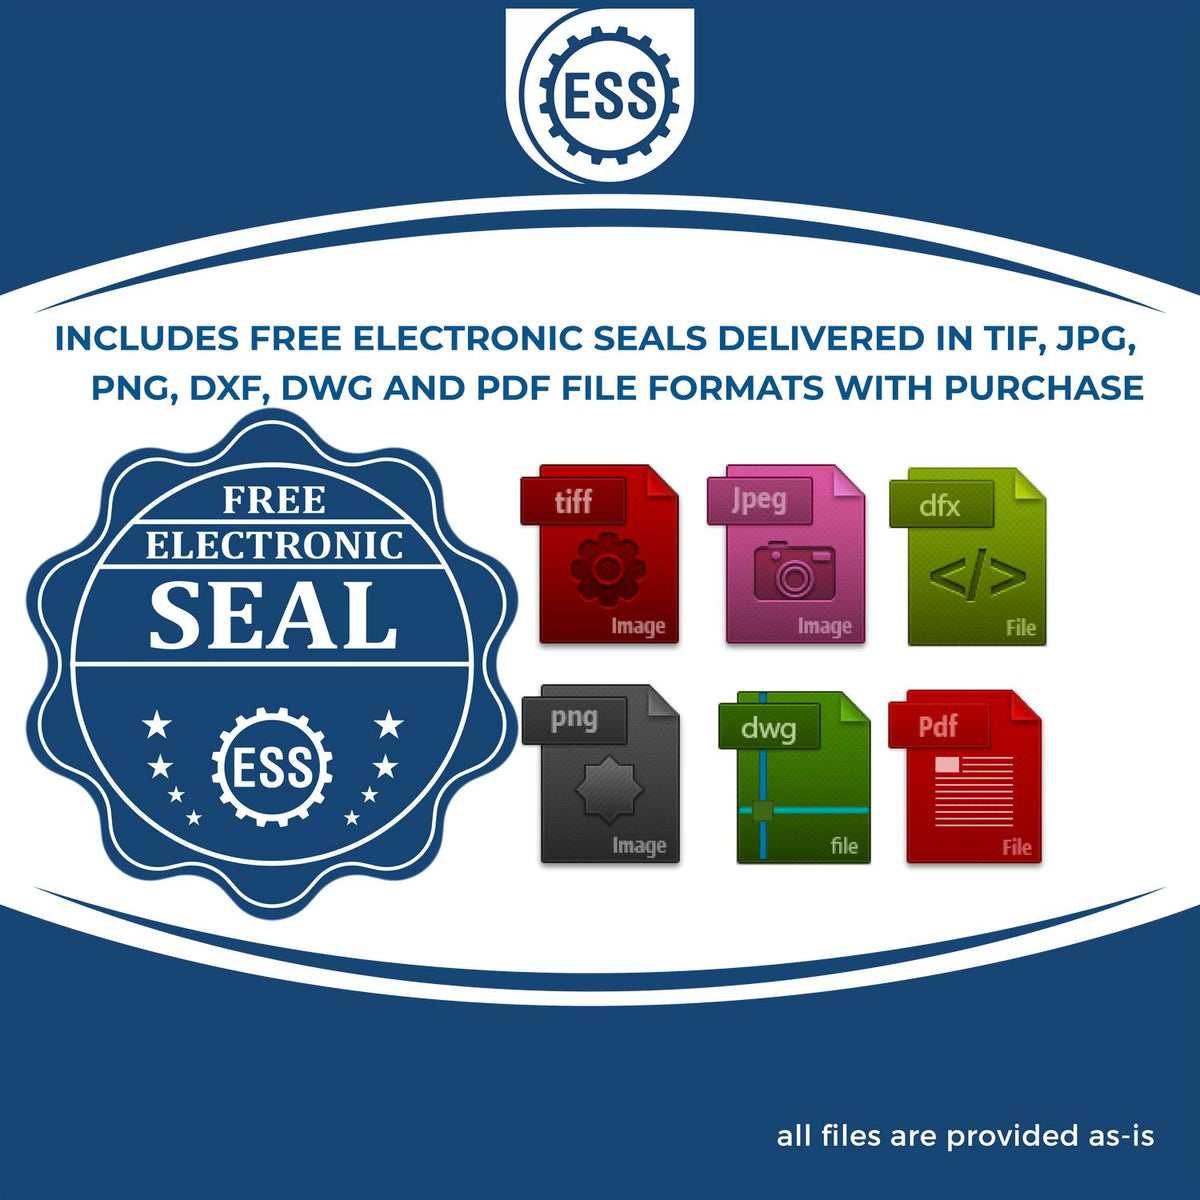 An infographic for the free electronic seal for the North Dakota Professional Engineer Seal Stamp illustrating the different file type icons such as DXF, DWG, TIF, JPG and PNG.